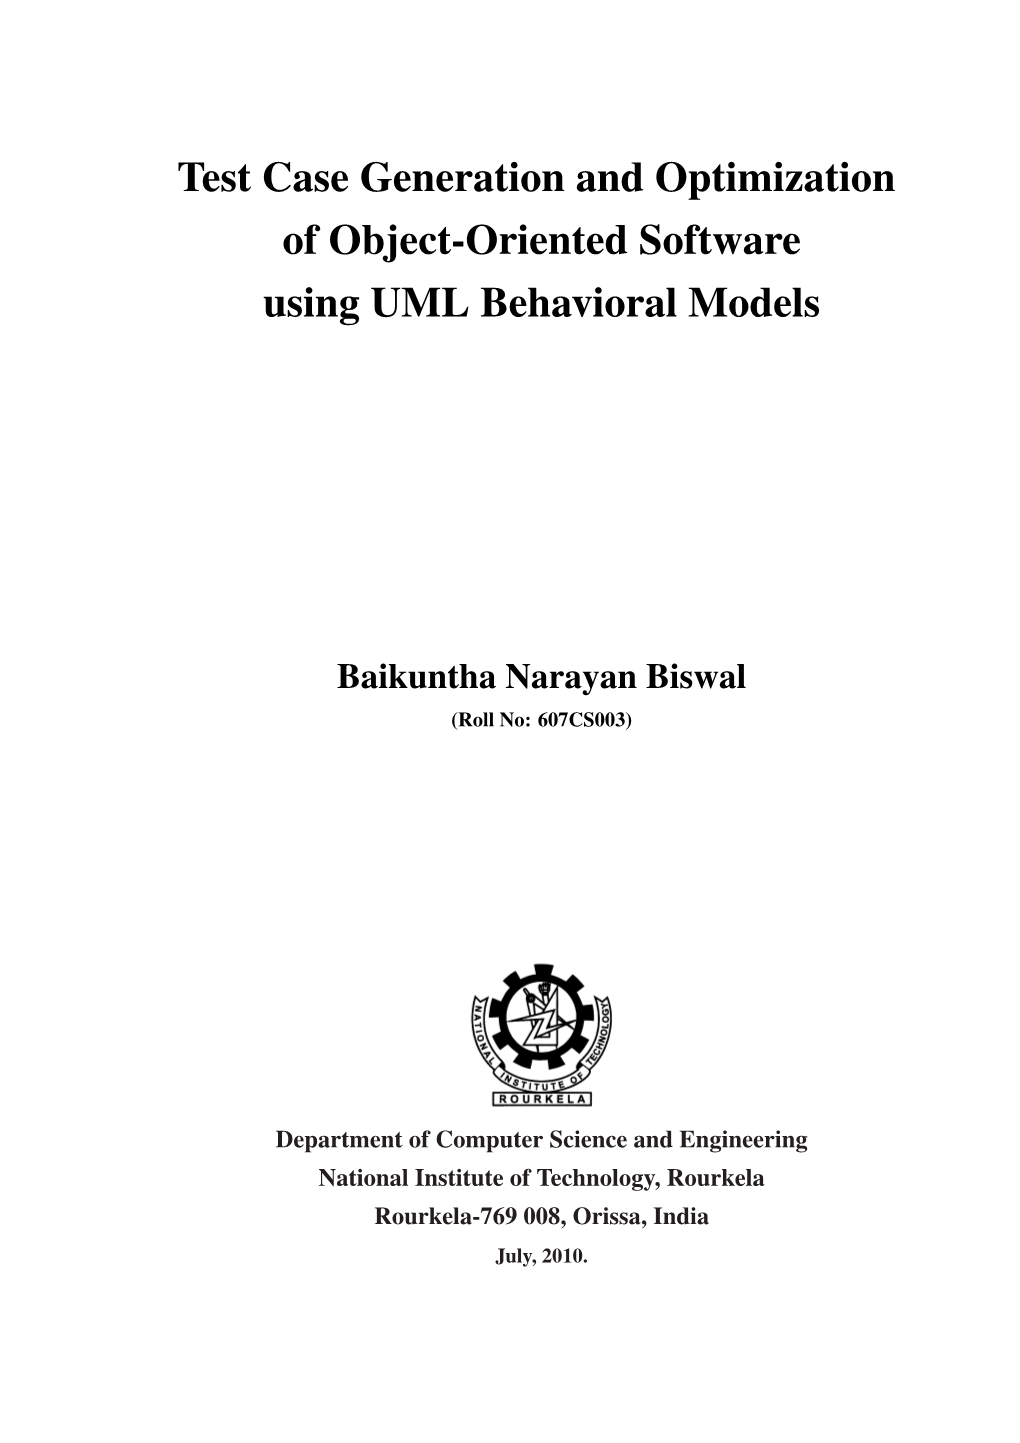 Test Case Generation and Optimization of Object-Oriented Software Using UML Behavioral Models